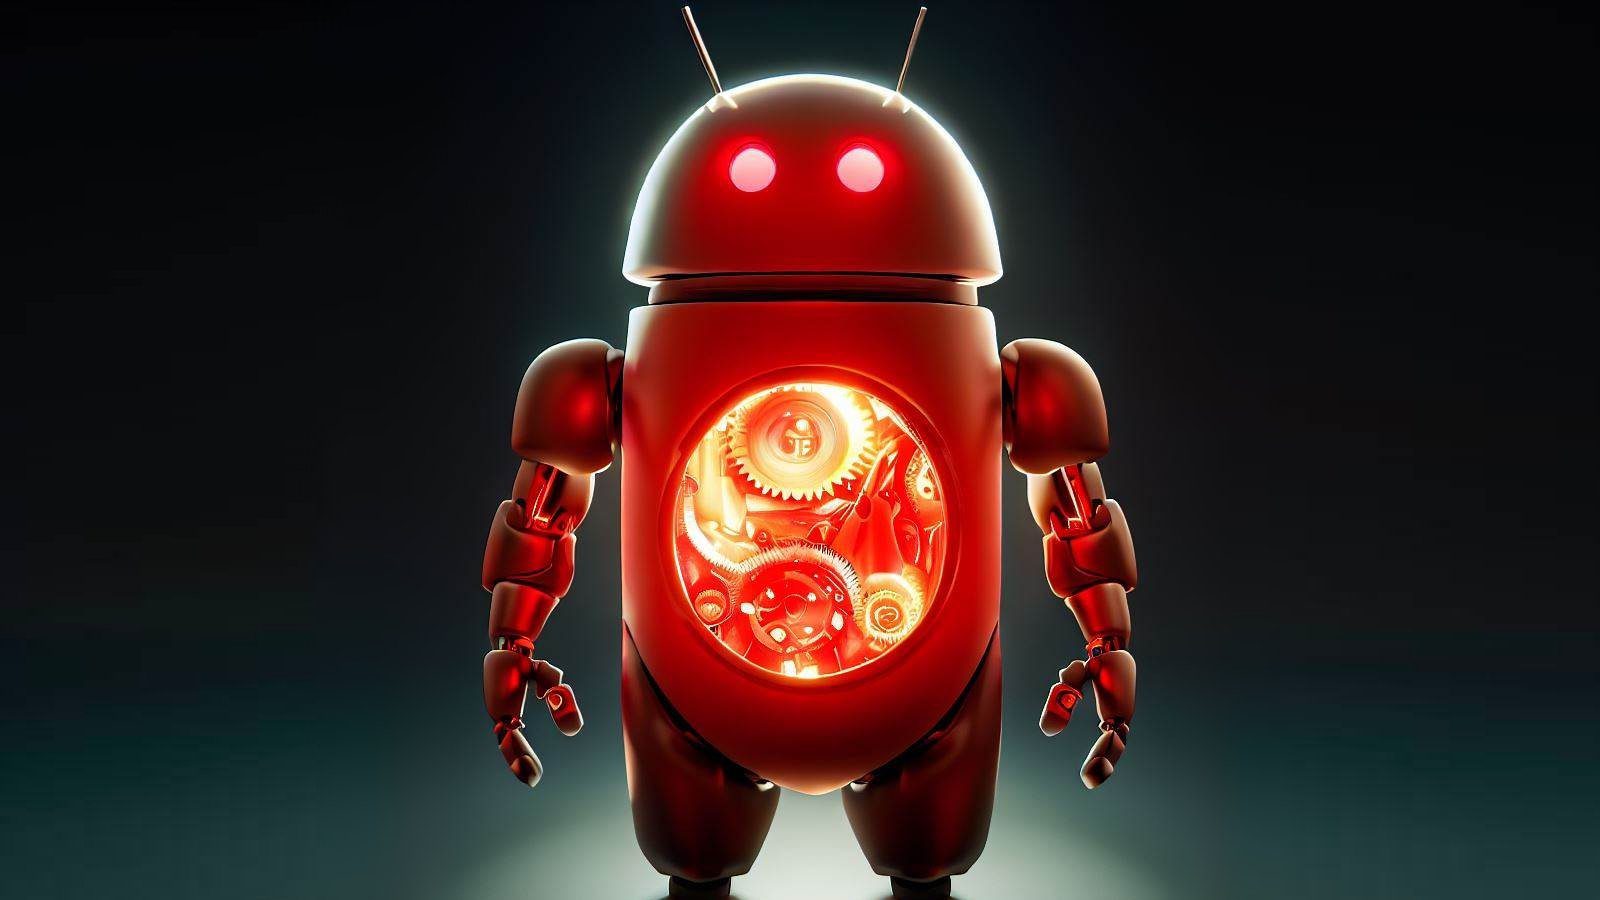 Anatsa Android trojan now steals banking info from users in US, UK – Source: www.bleepingcomputer.com